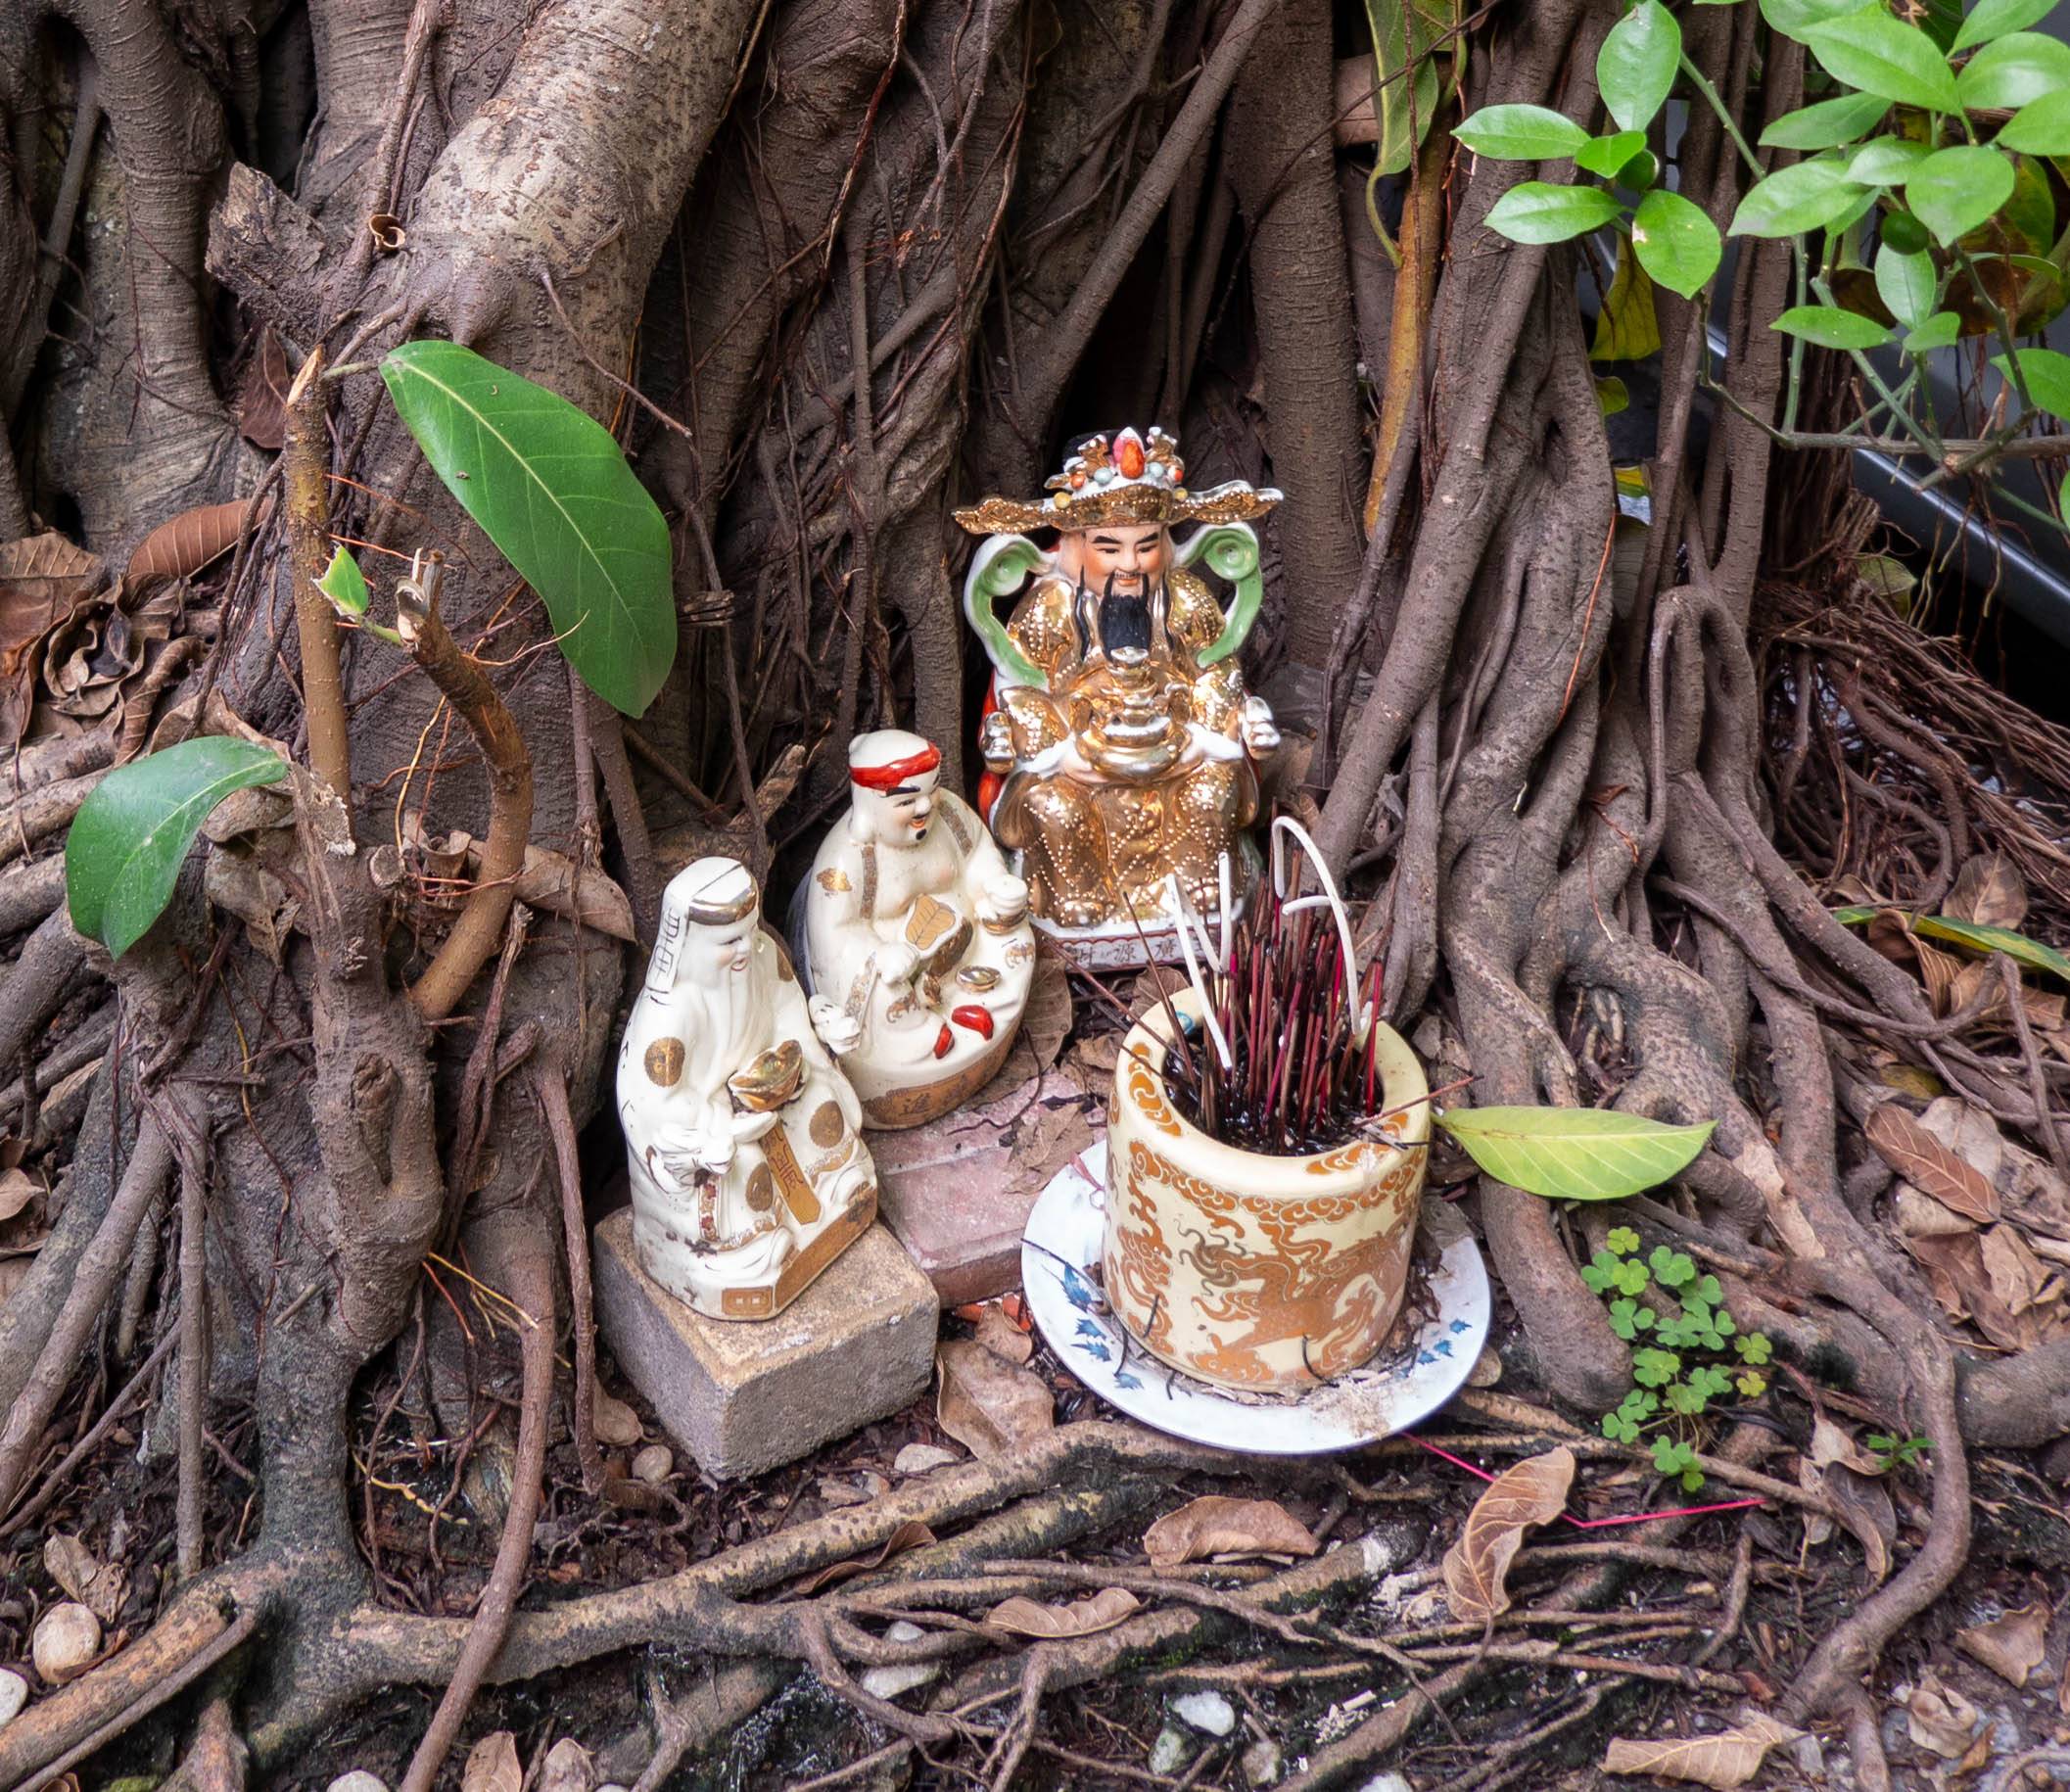 Picture of statues in crotch of tree branches showing three figurines on the left, left center, and left top, with an incense holder with many burned incense sticks.